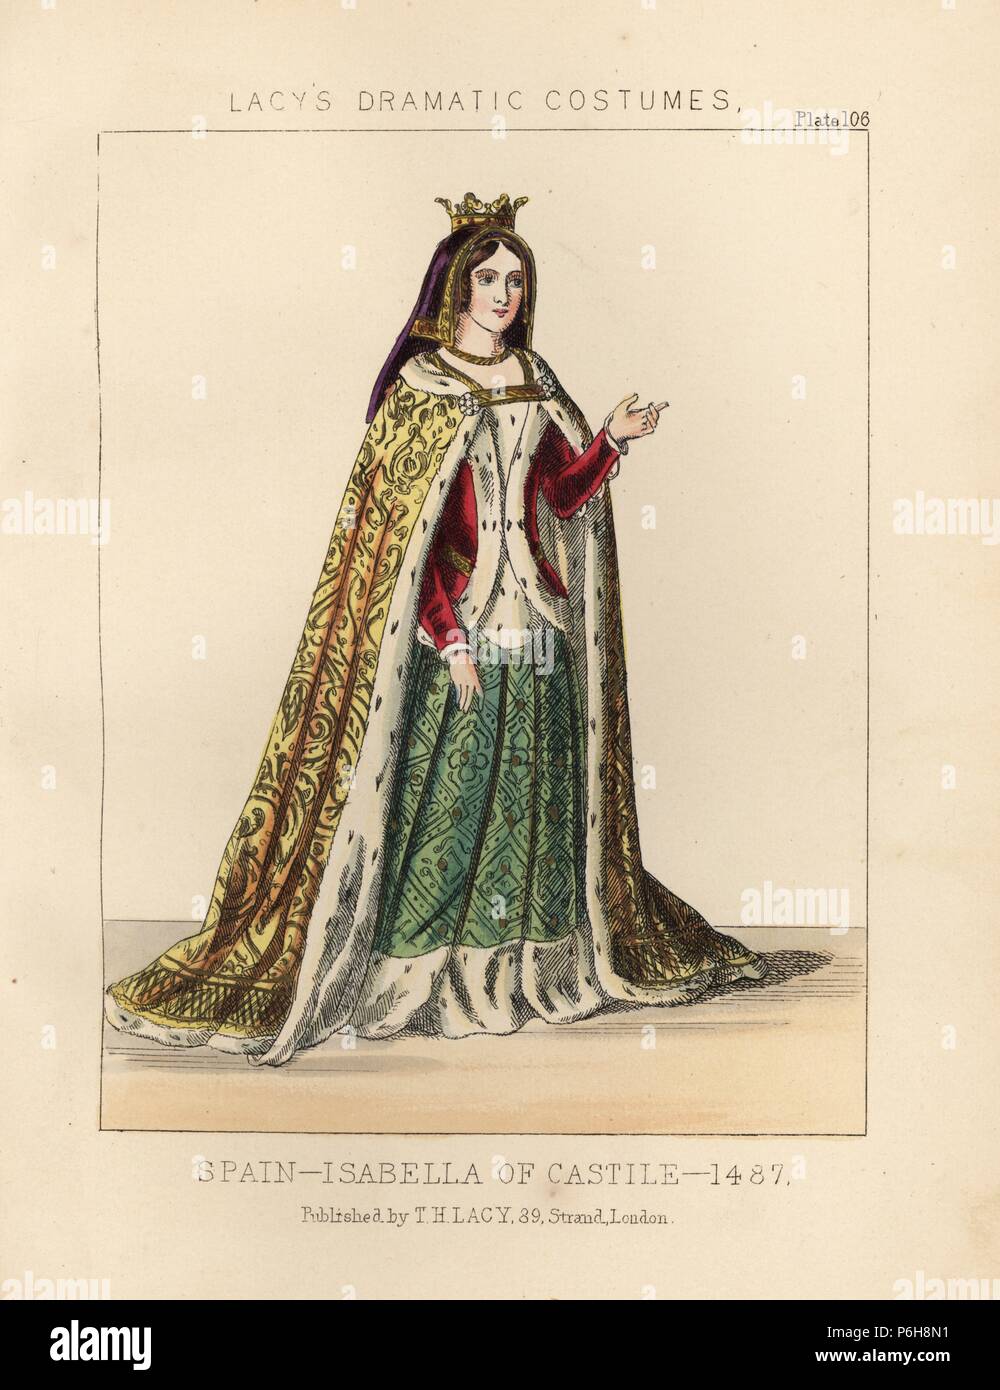 Isabella of Castile, Spain, 1487. She wears a crown over purple veil, gold cape lined with ermine, crimson jacket lined with ermine, green skirt. Handcoloured lithograph from Thomas Hailes Lacy's 'Female Costumes Historical, National and Dramatic in 200 Plates,' London, 1865. Lacy (1809-1873) was a British actor, playwright, theatrical manager and publisher. Stock Photo